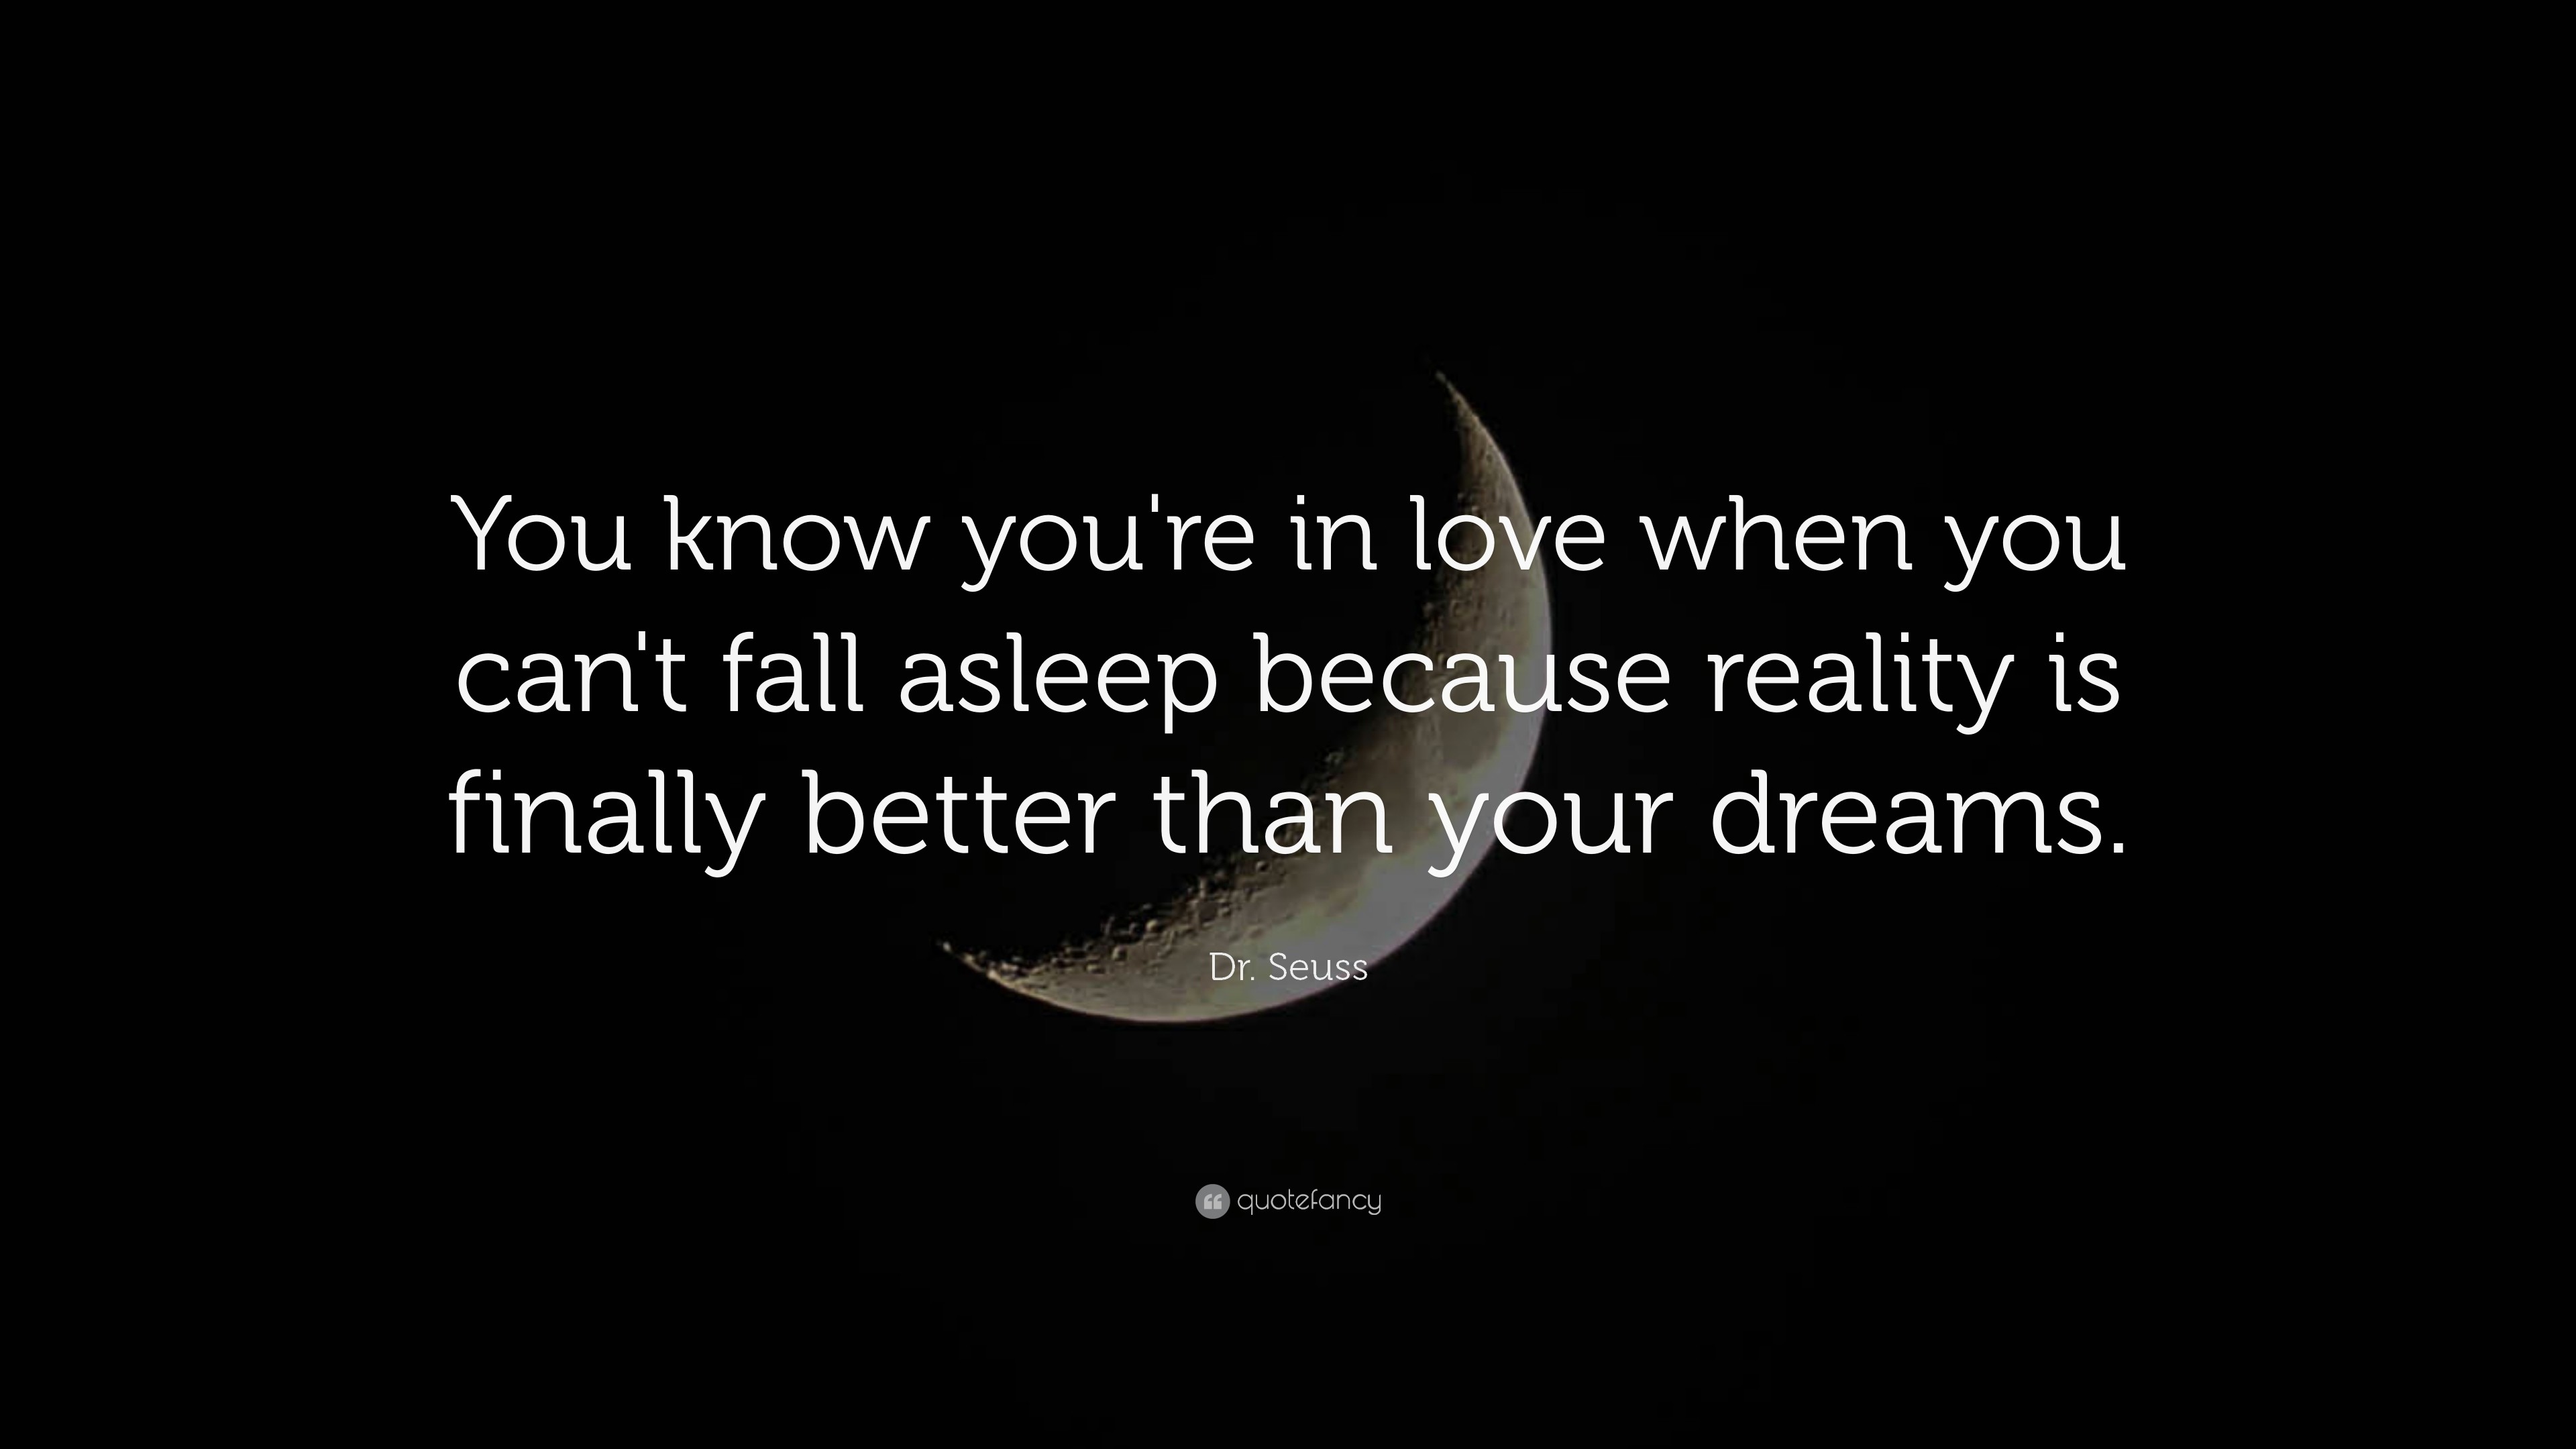 3840x2160 Love Quotes: “You know you're in love when you can't